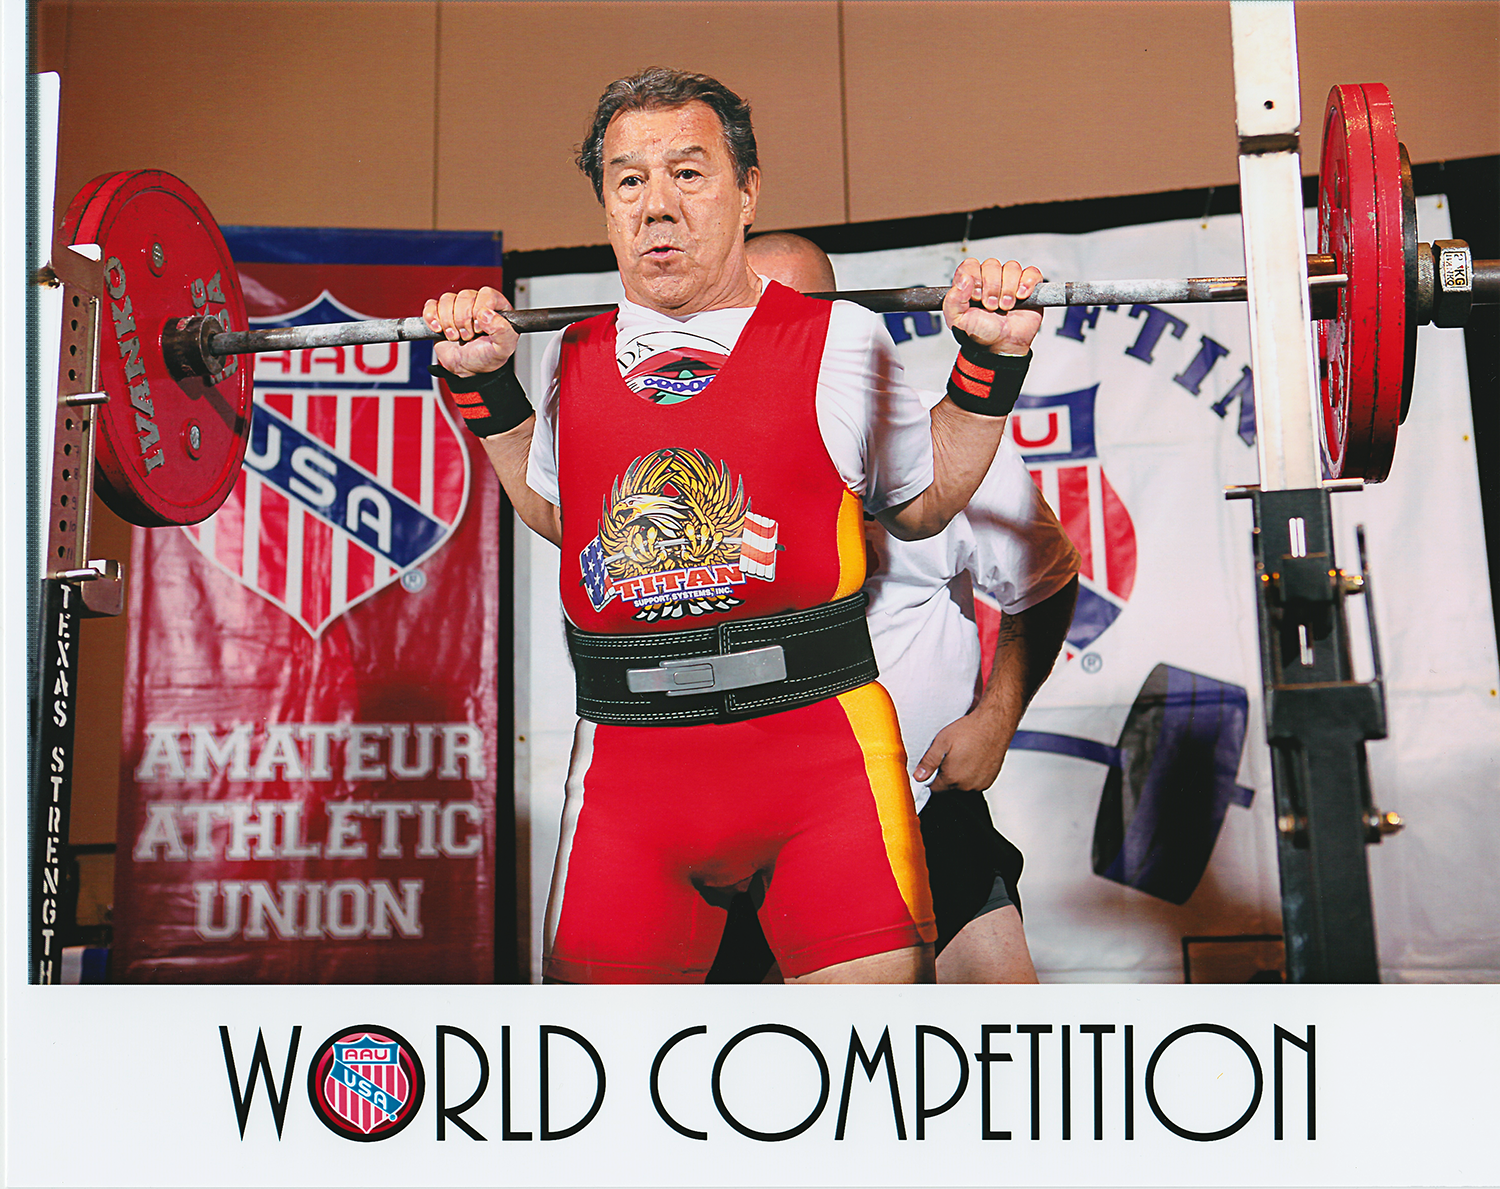 At 60, Delray man sets world record in powerlifting; competing